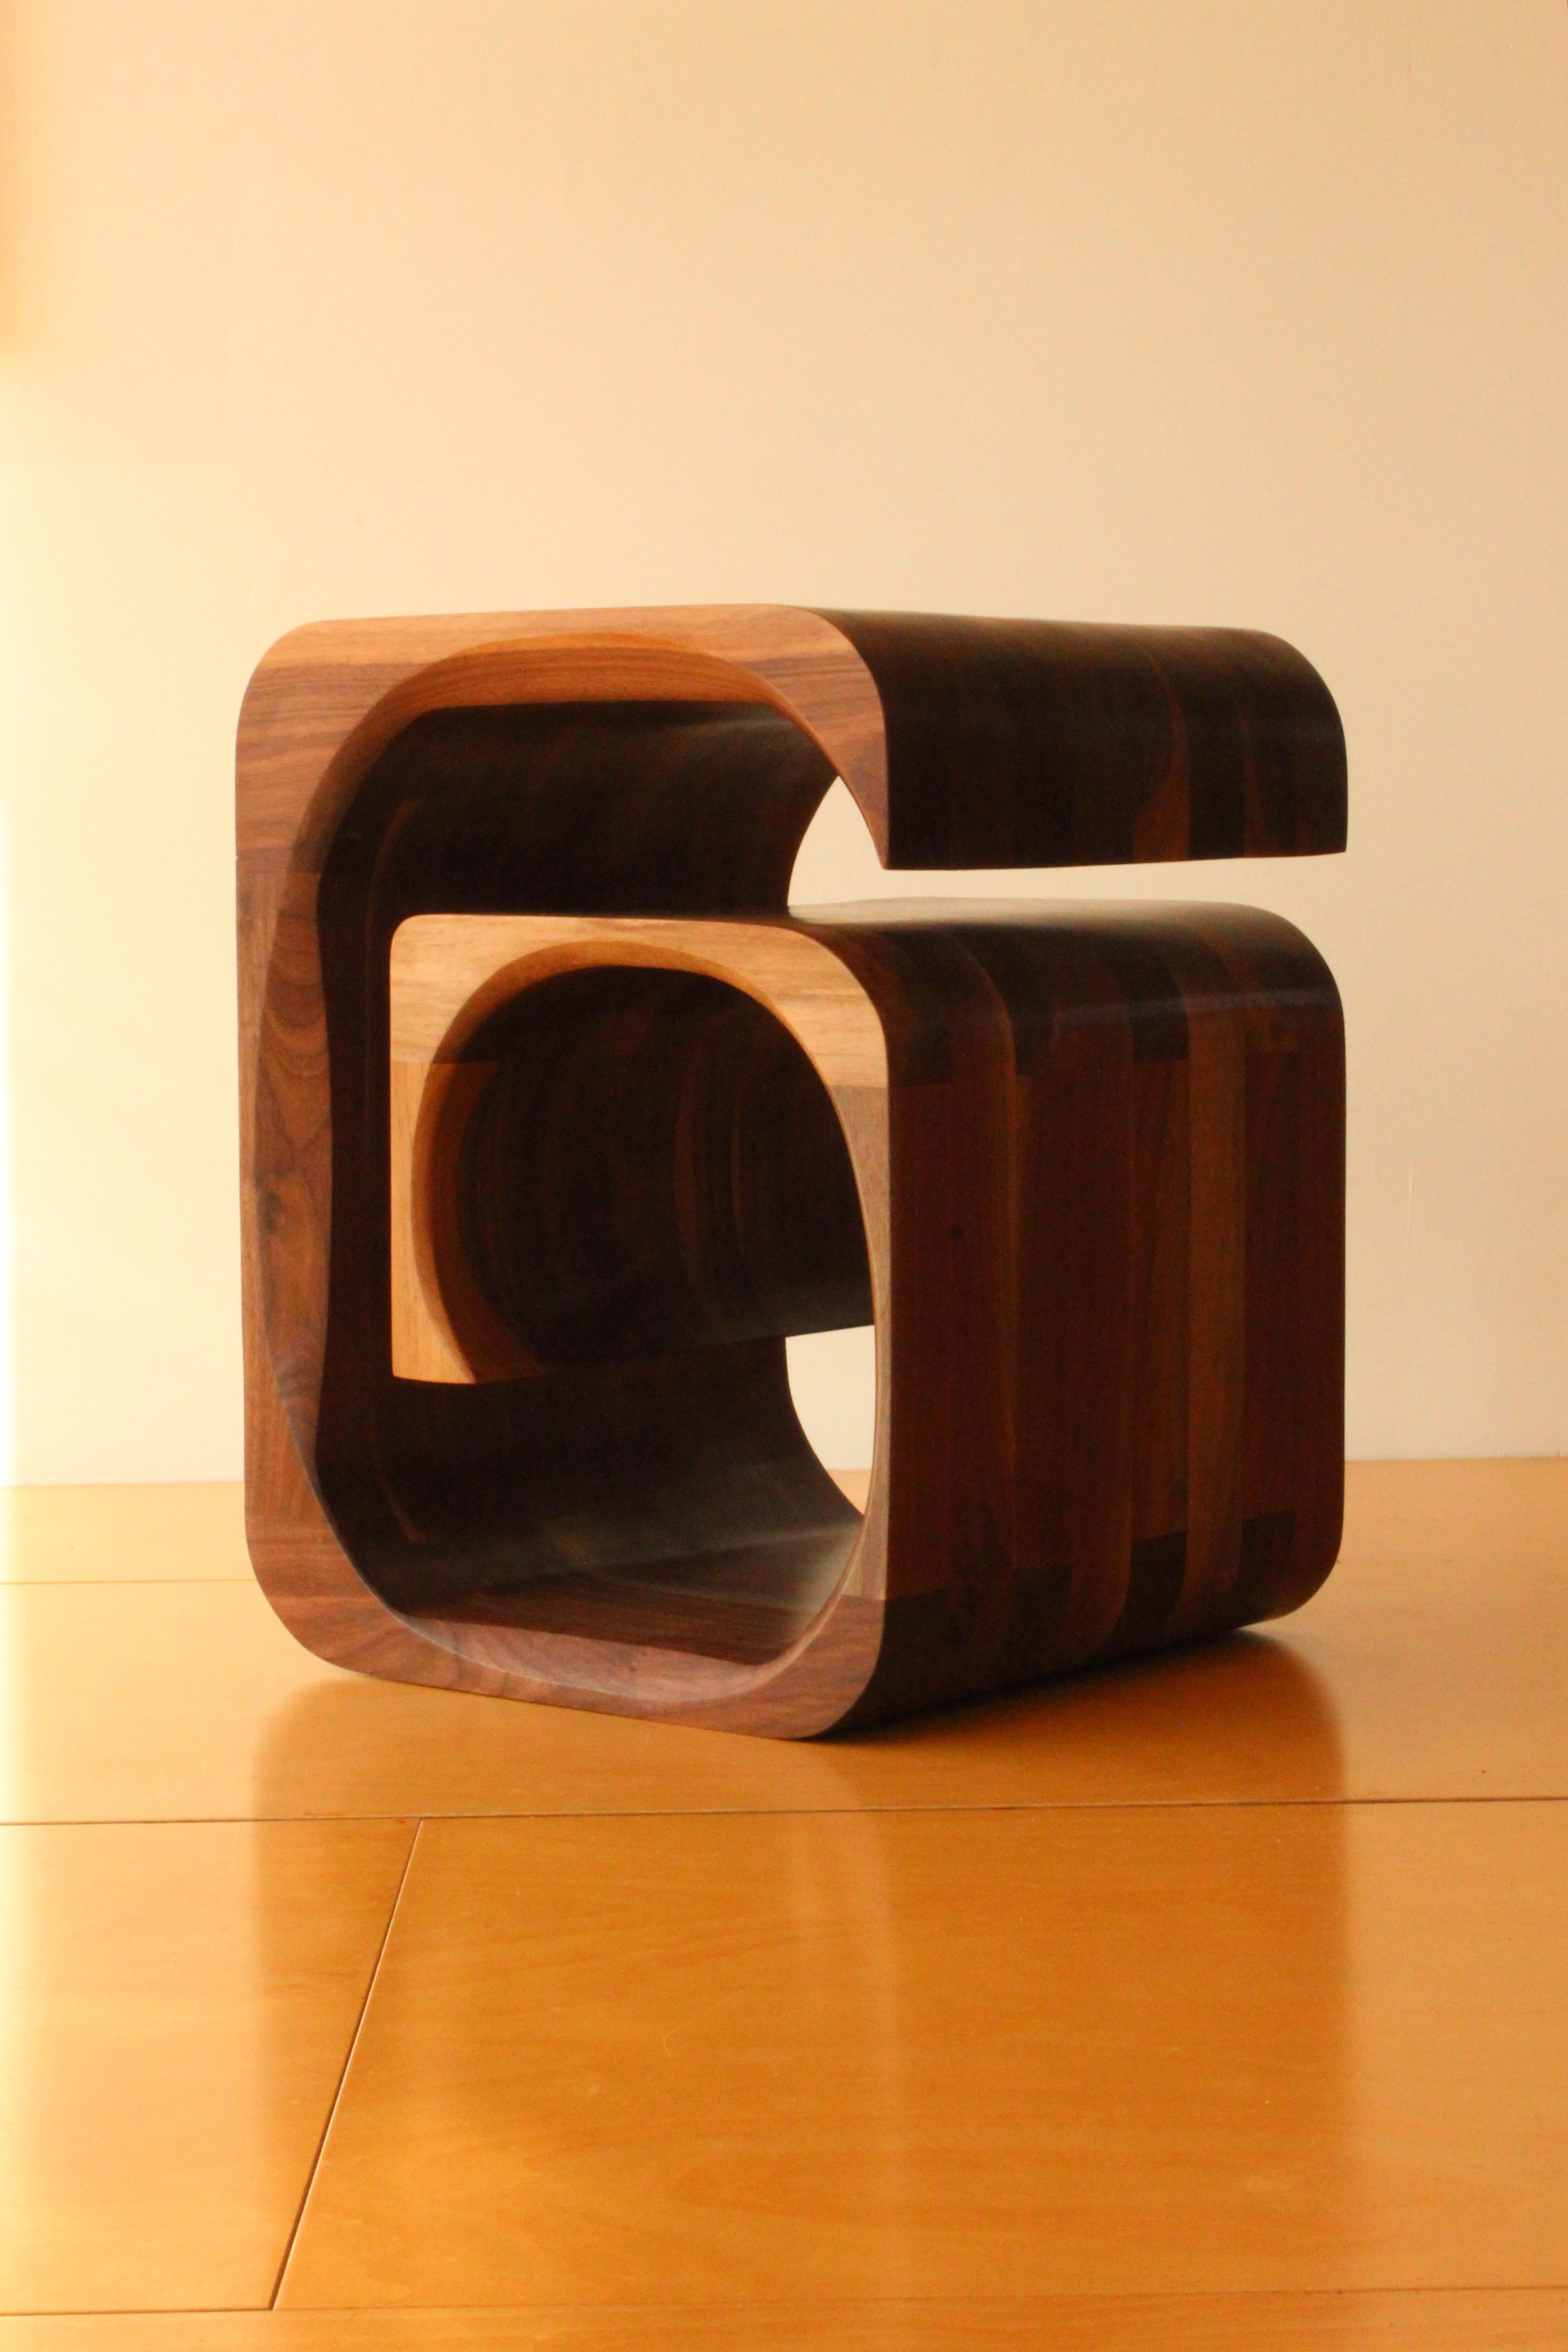 Laminated A pair of side tables in solid American black walnut by Jonathan Field.